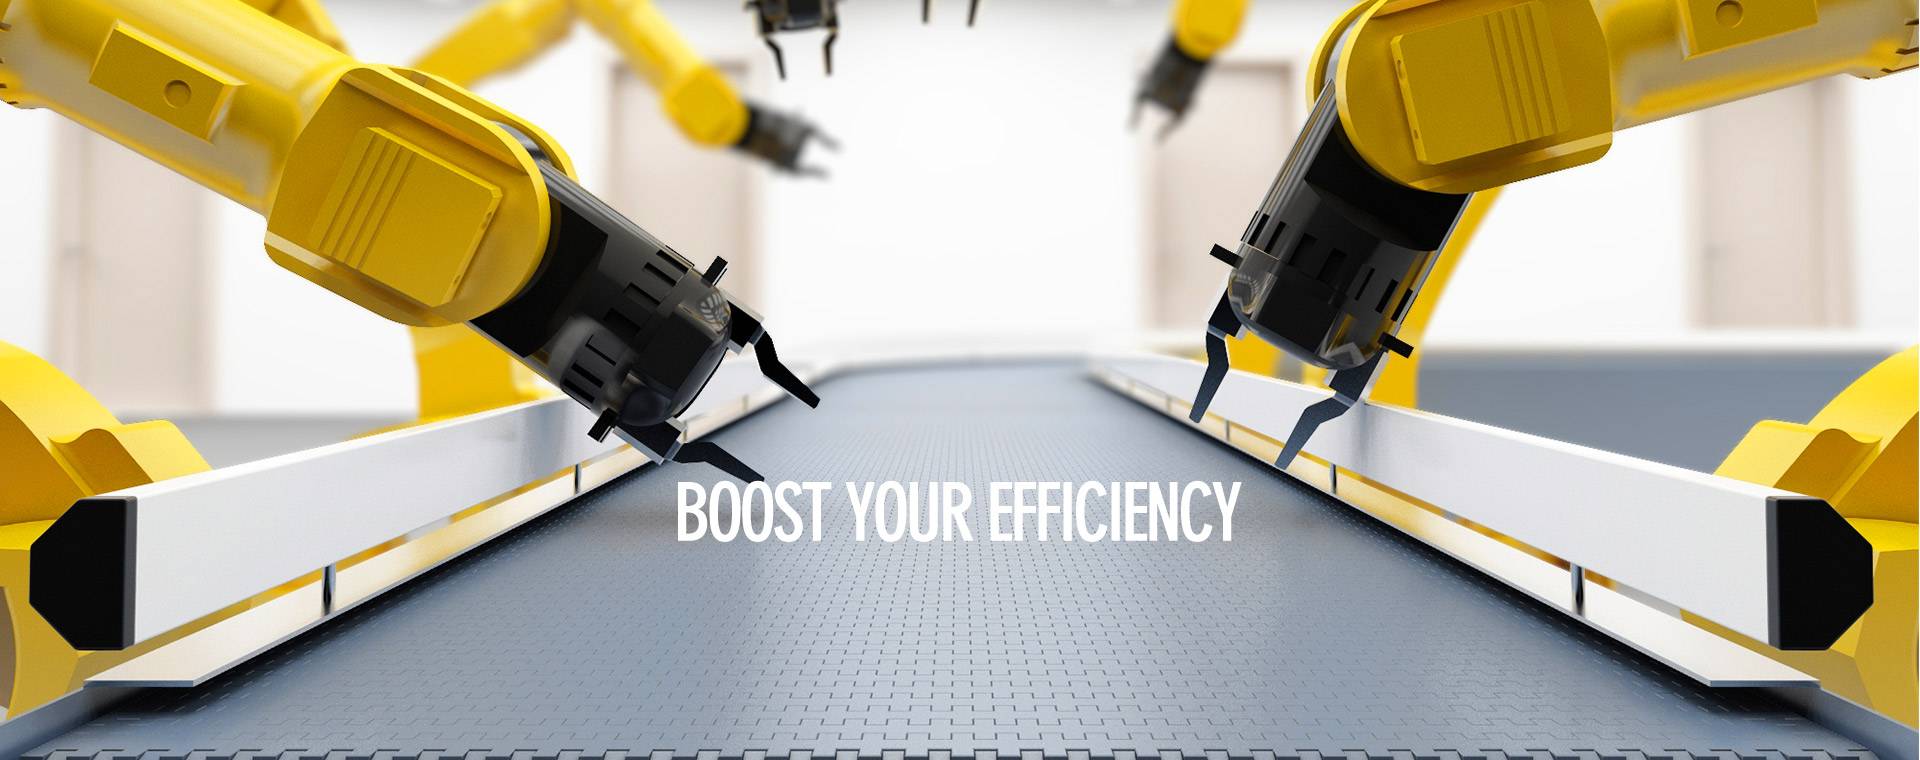 boost-your-efficiency